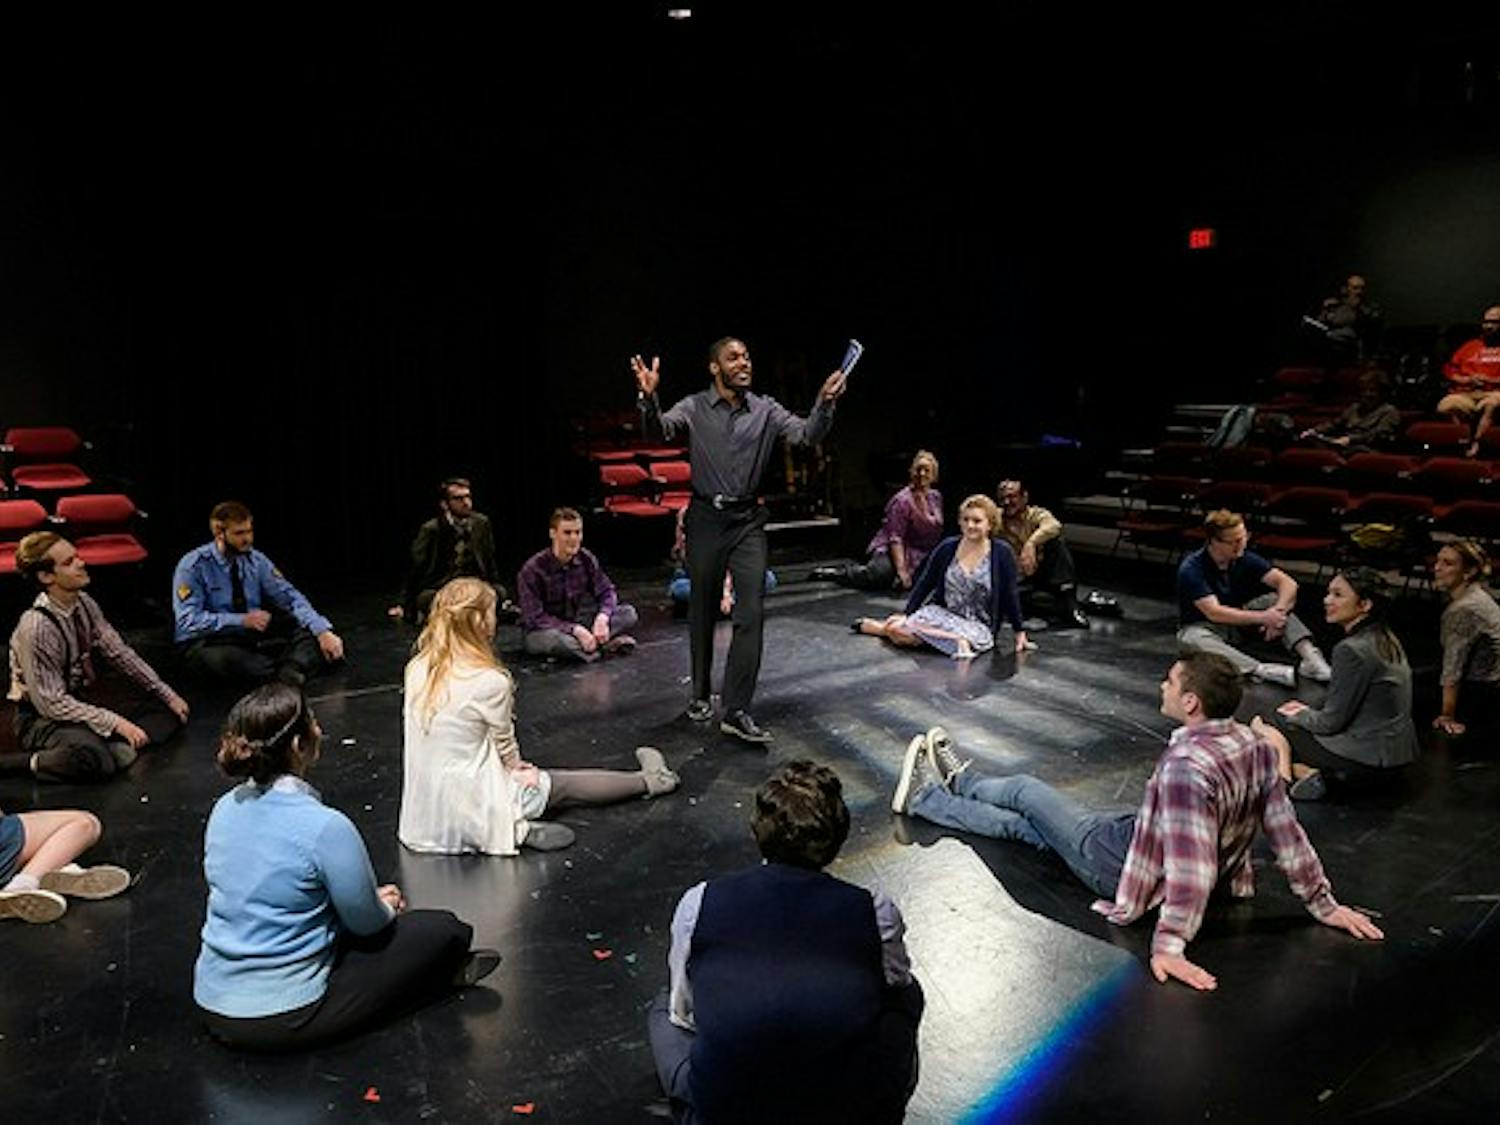 The production of ‘Our Town’ is put on by the University Theatre.